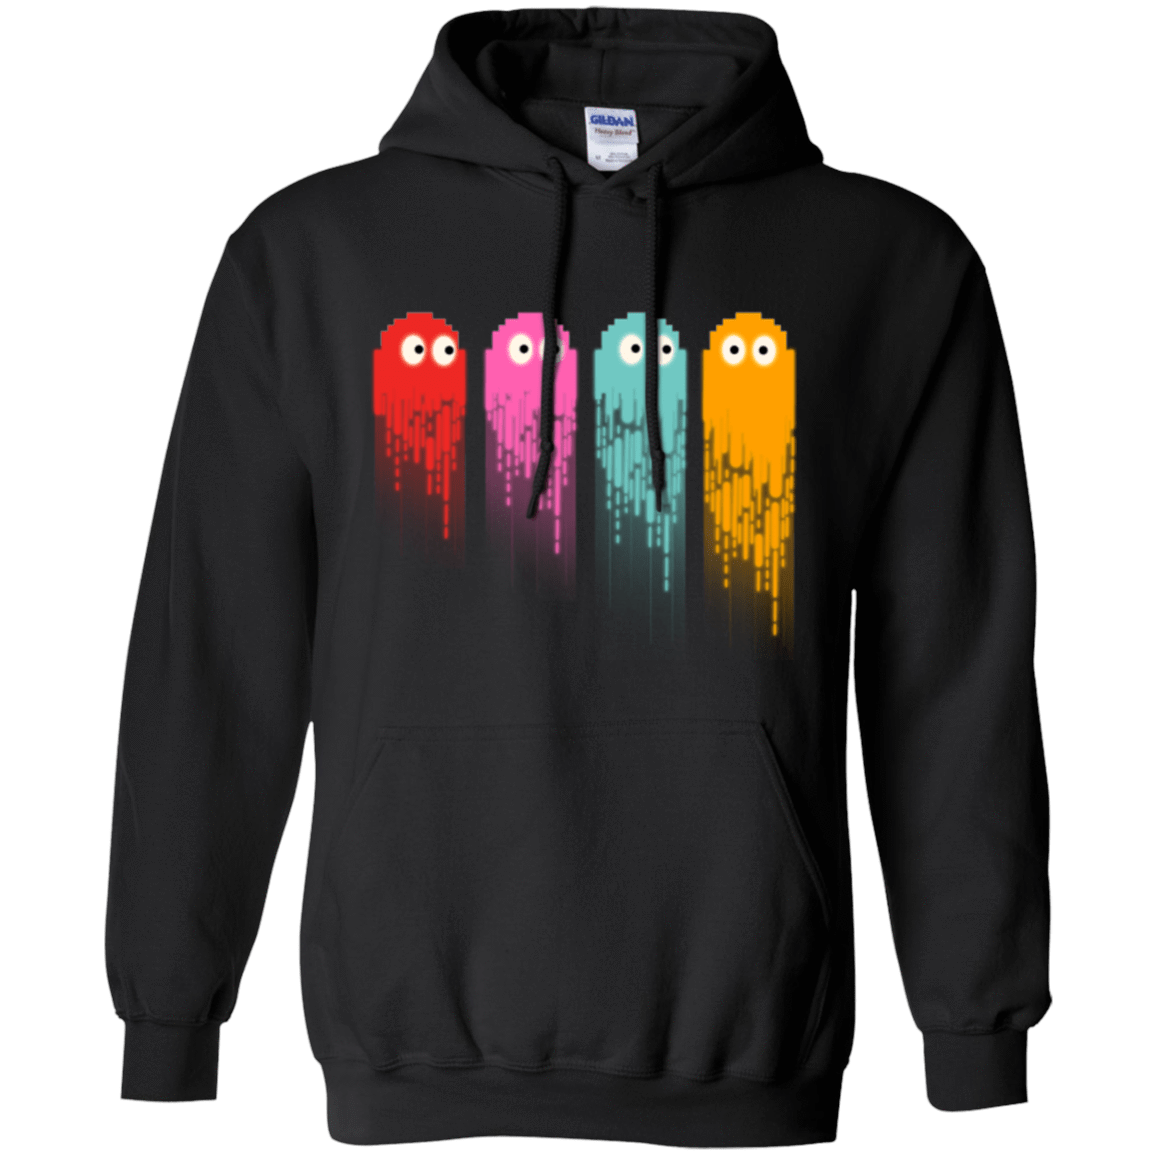 Sweatshirts Black / Small Pac color ghost Pullover Hoodie